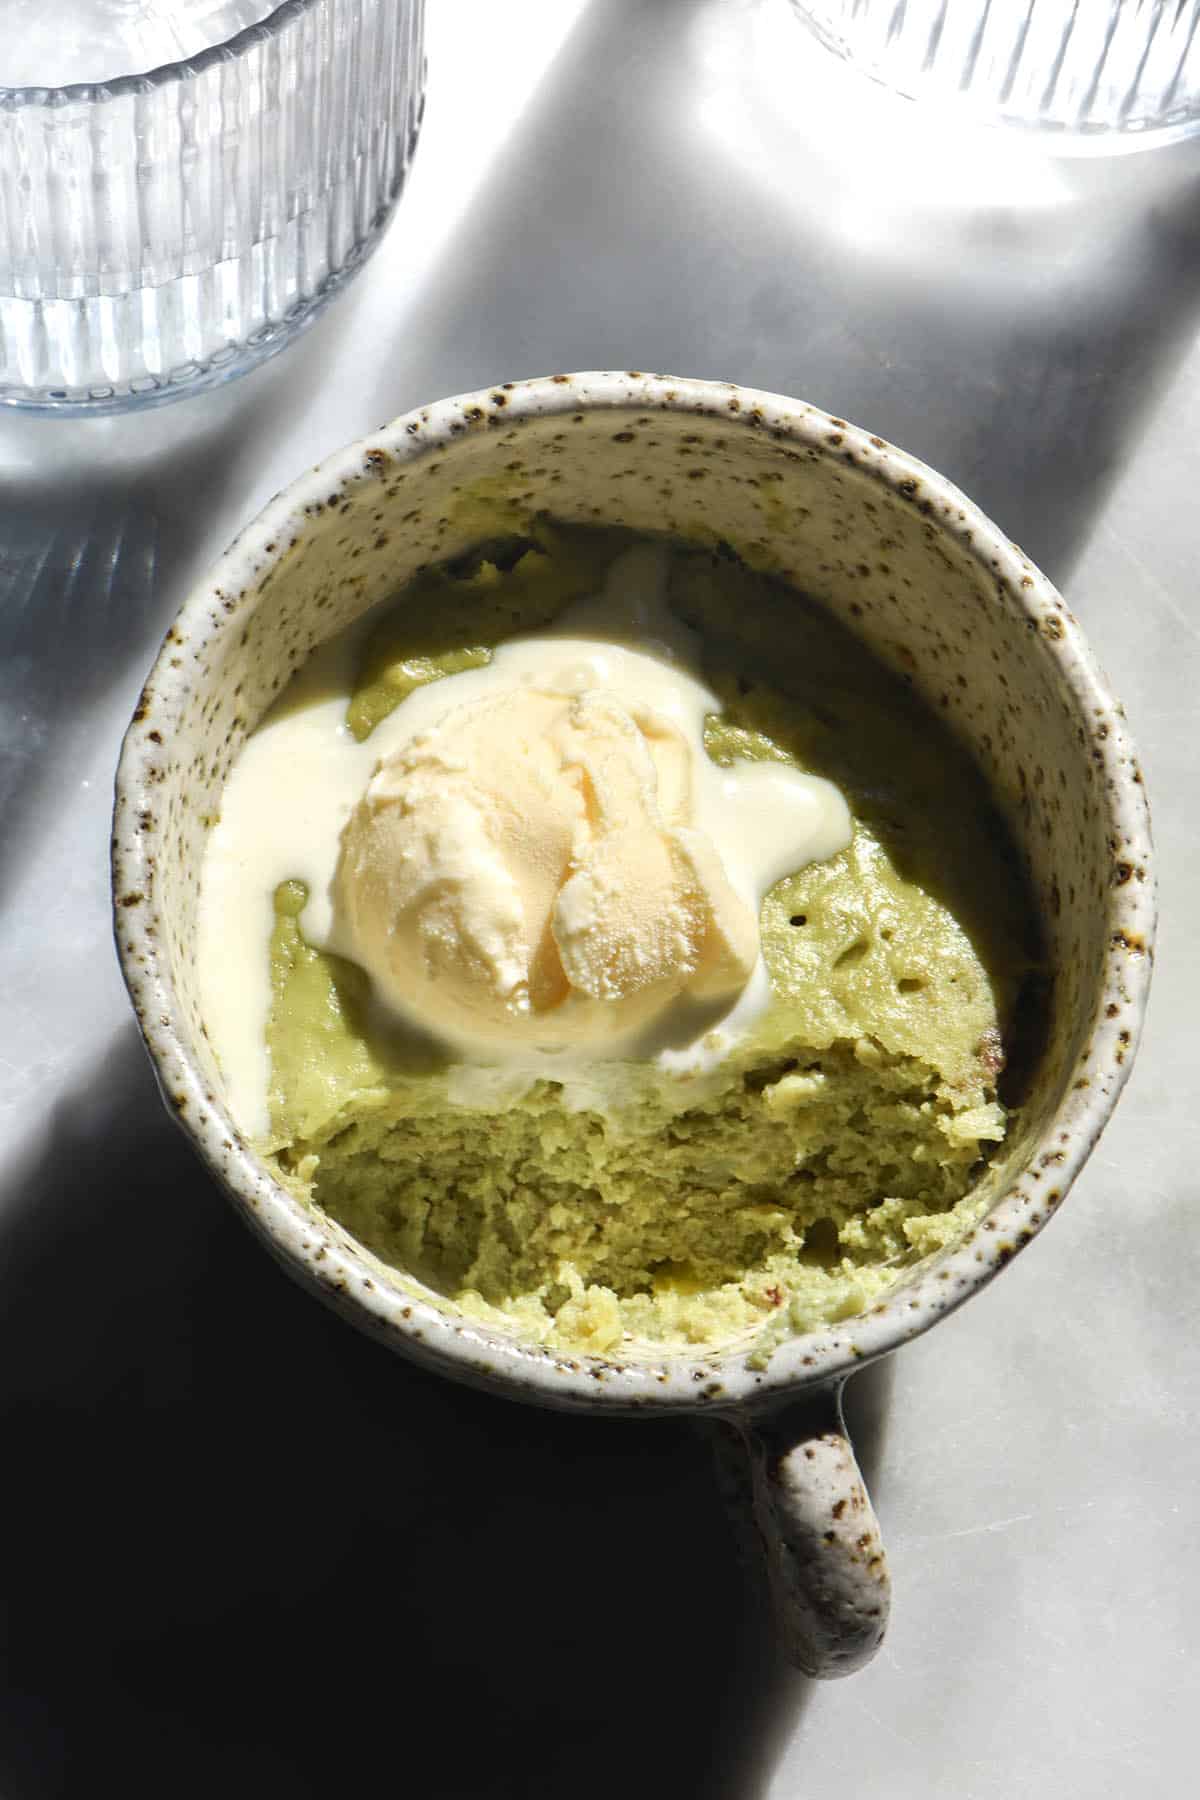 A close up aerial image of a vegan protein mug cake made with pumpkin seed protein. The mug cake is a matcha green and topped with melting vanilla ice cream. It sits atop a sunlit white marble table with glasses of water in the background 